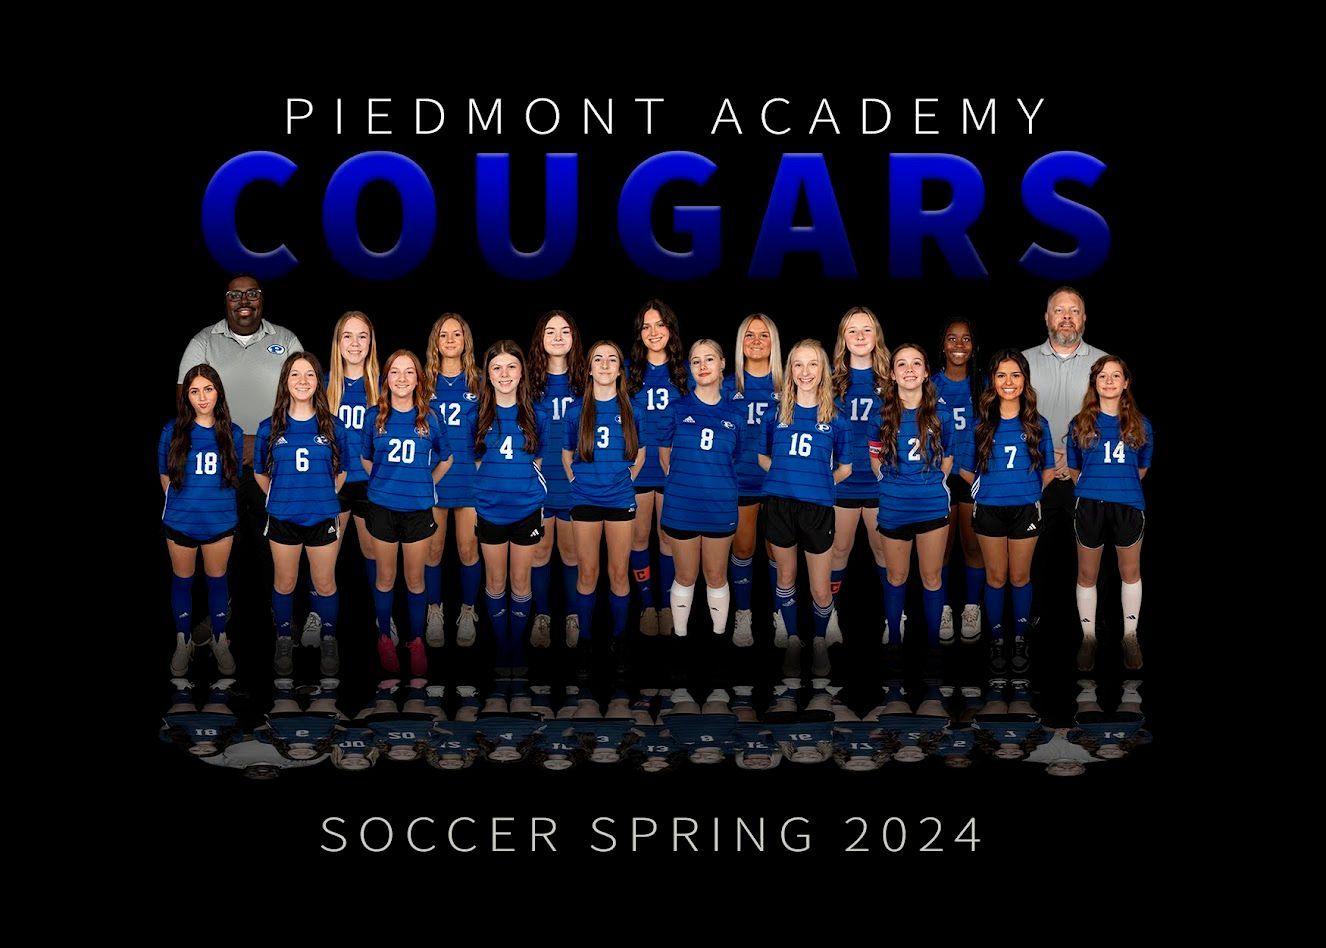 the piedmont academy cougars soccer team is posing for a team photo .